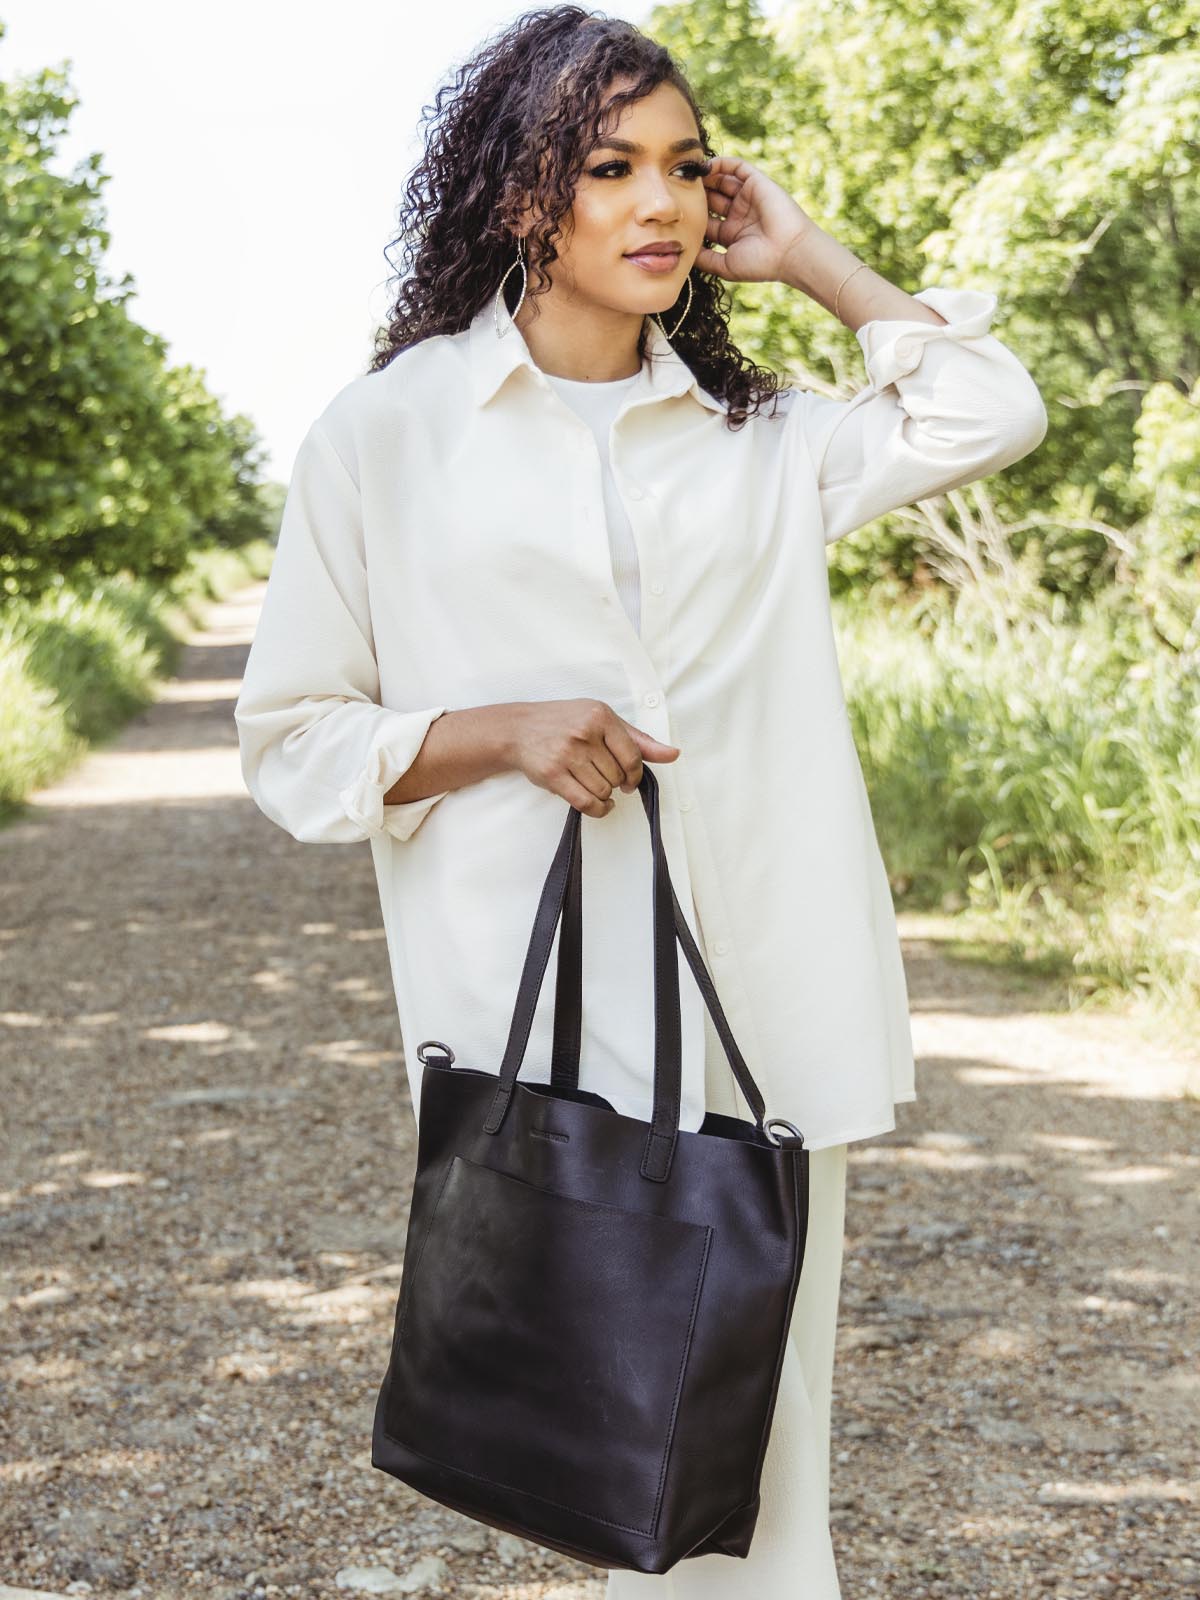 Model in an outdoor setting with made free black leather bag. The model is show holding the bag using the hand straps. 